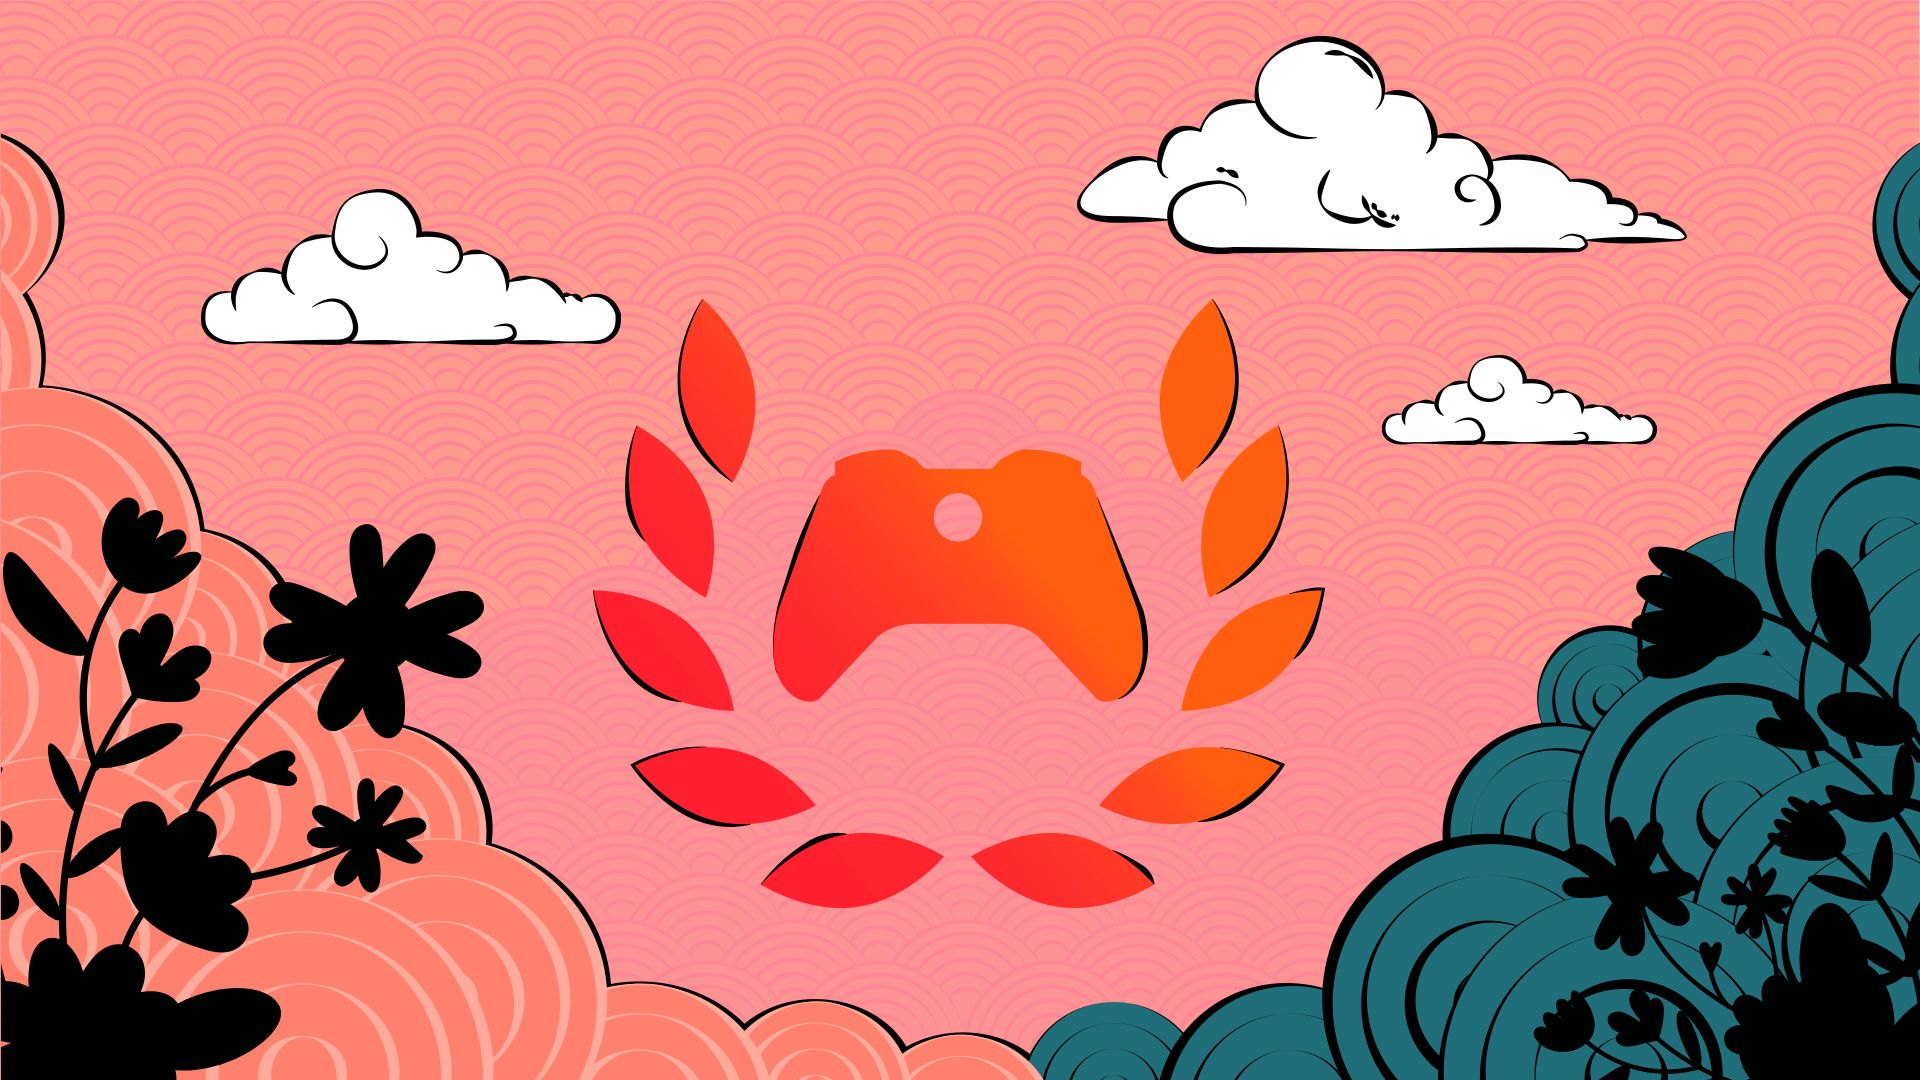 The Xbox Ambassadors logo colored in orange on a light red, pink and light blue circular textured background with clouds and flowery silhouettes.